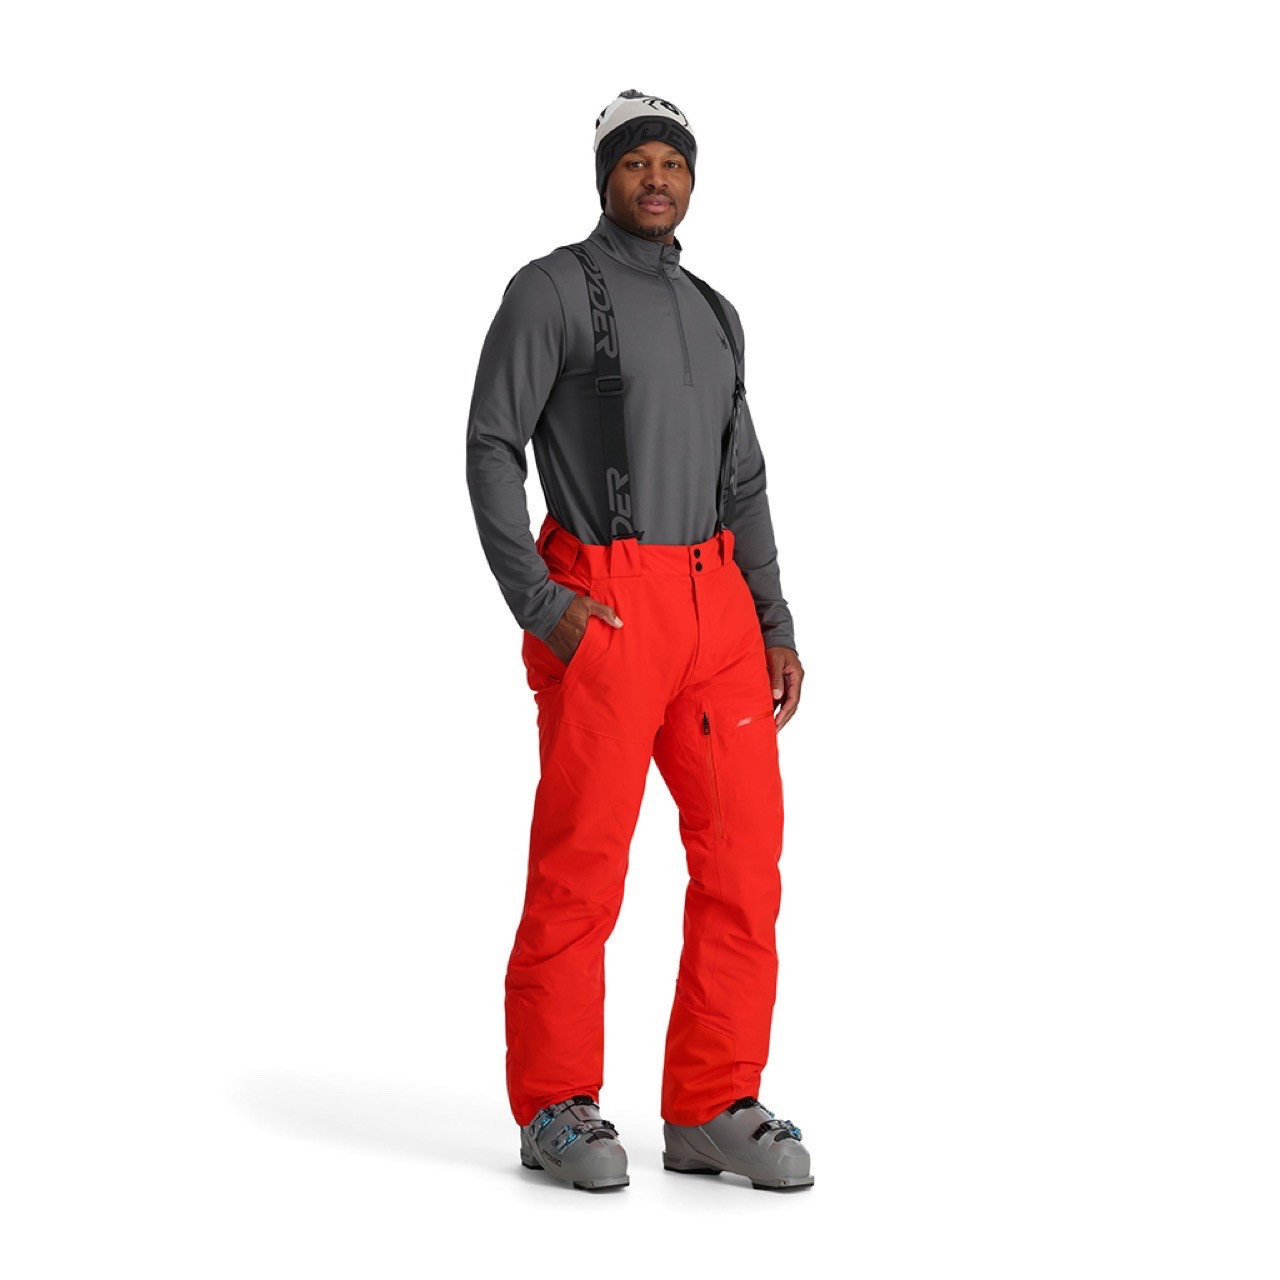 Spyder Dare Insulated Snow Pants Lengths Men's